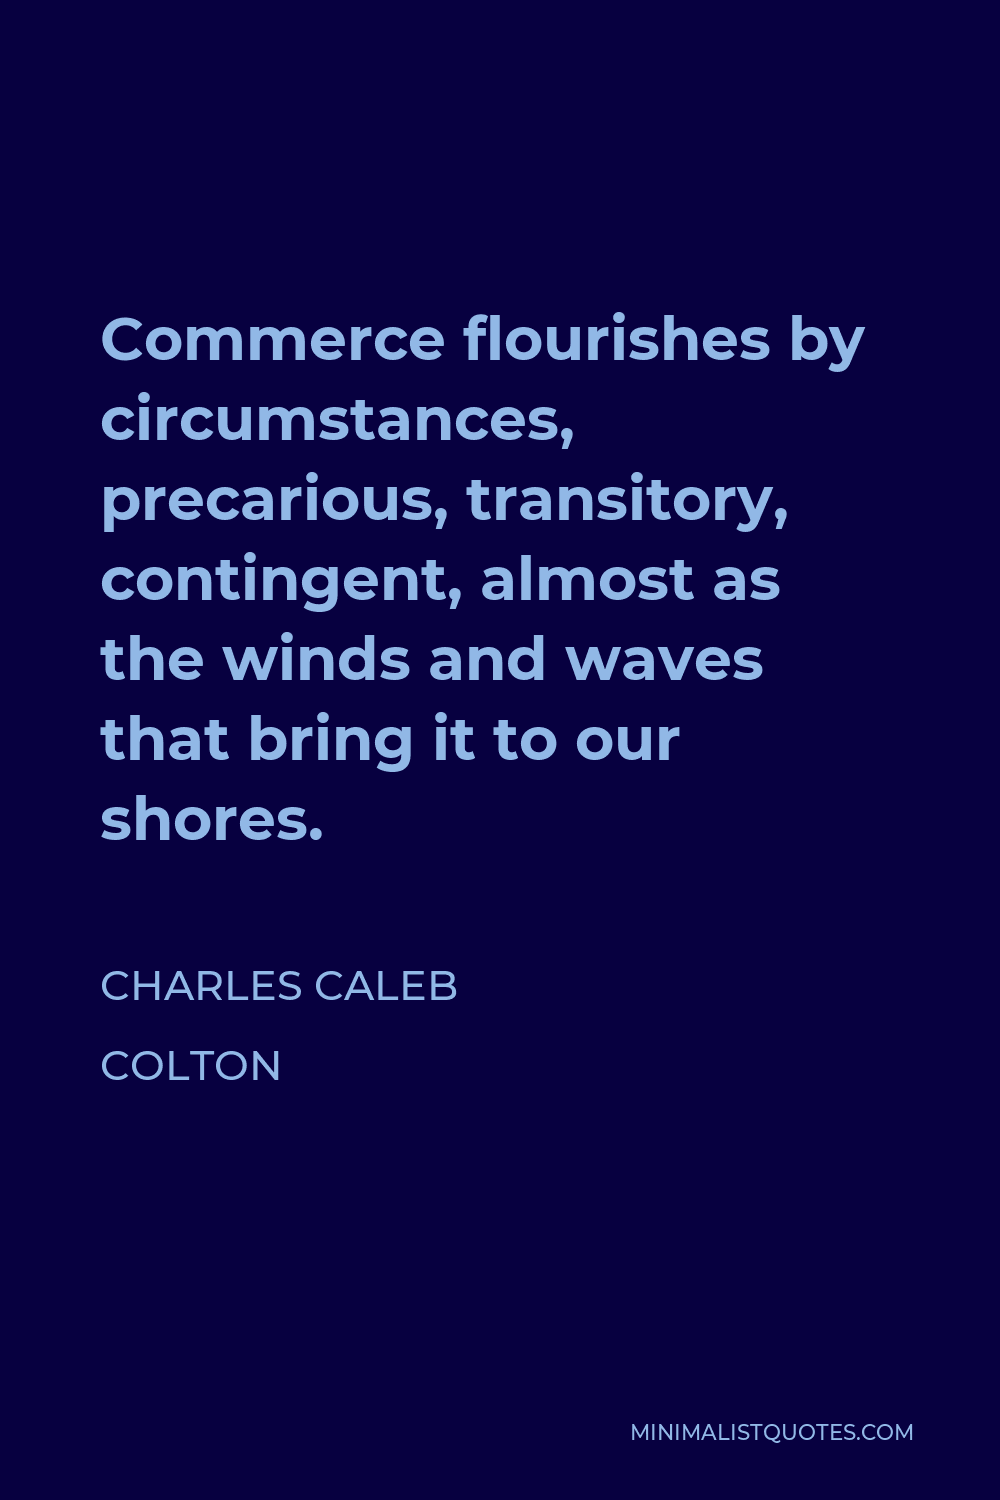 Charles Caleb Colton Quote - Commerce flourishes by circumstances, precarious, transitory, contingent, almost as the winds and waves that bring it to our shores.